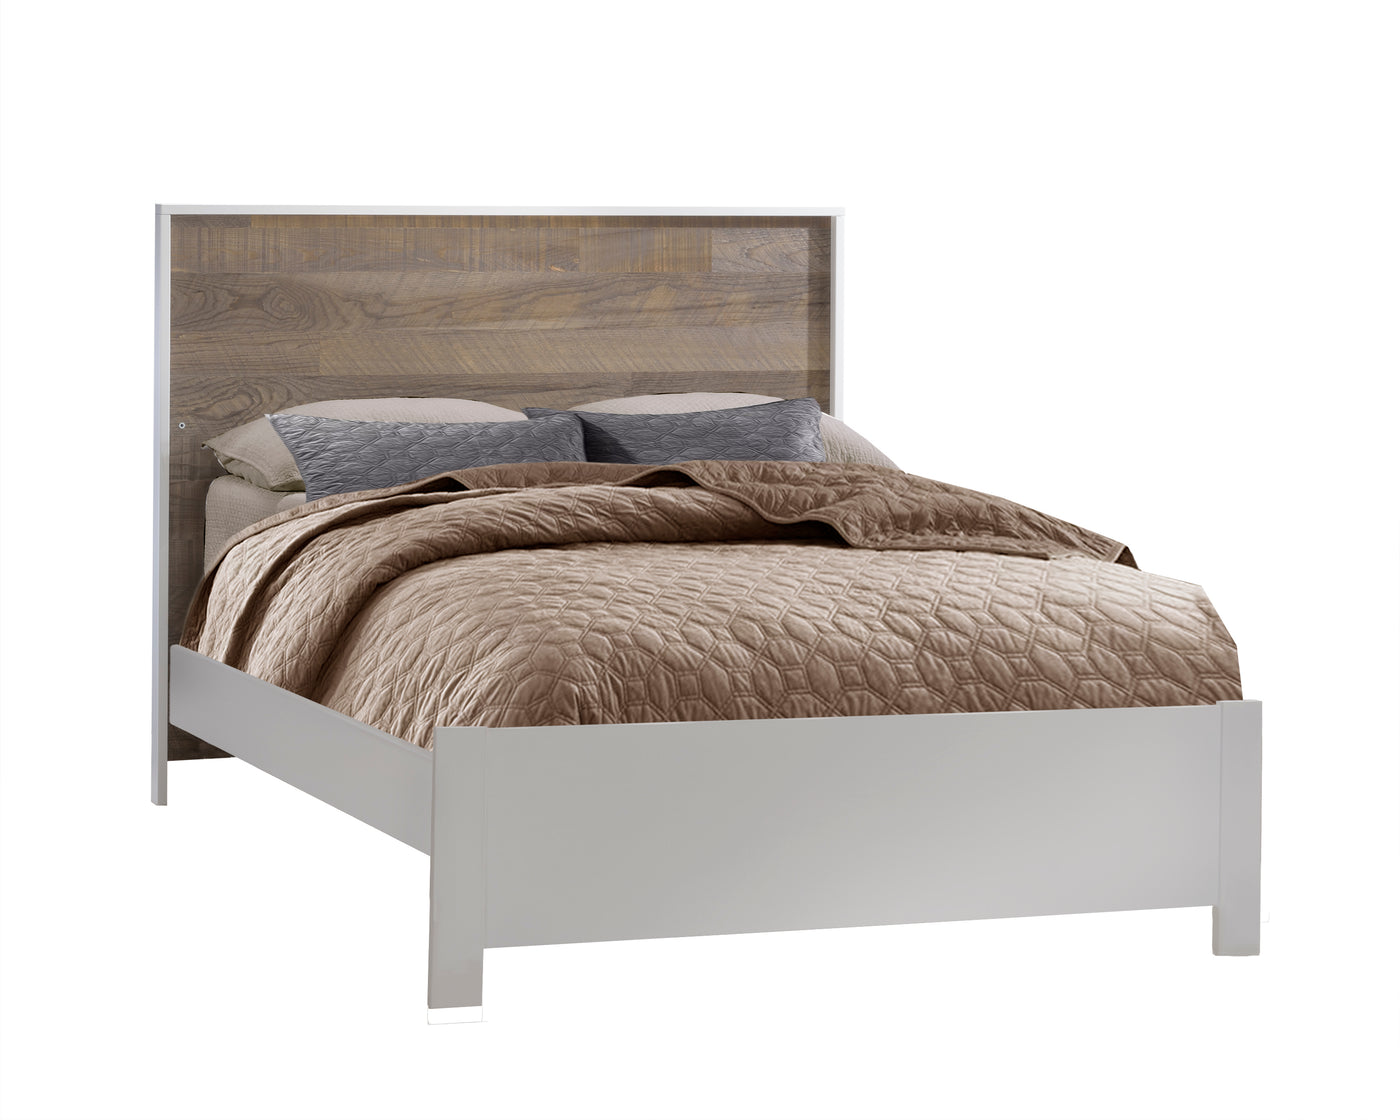 Nest Low profile footboard 54" in White